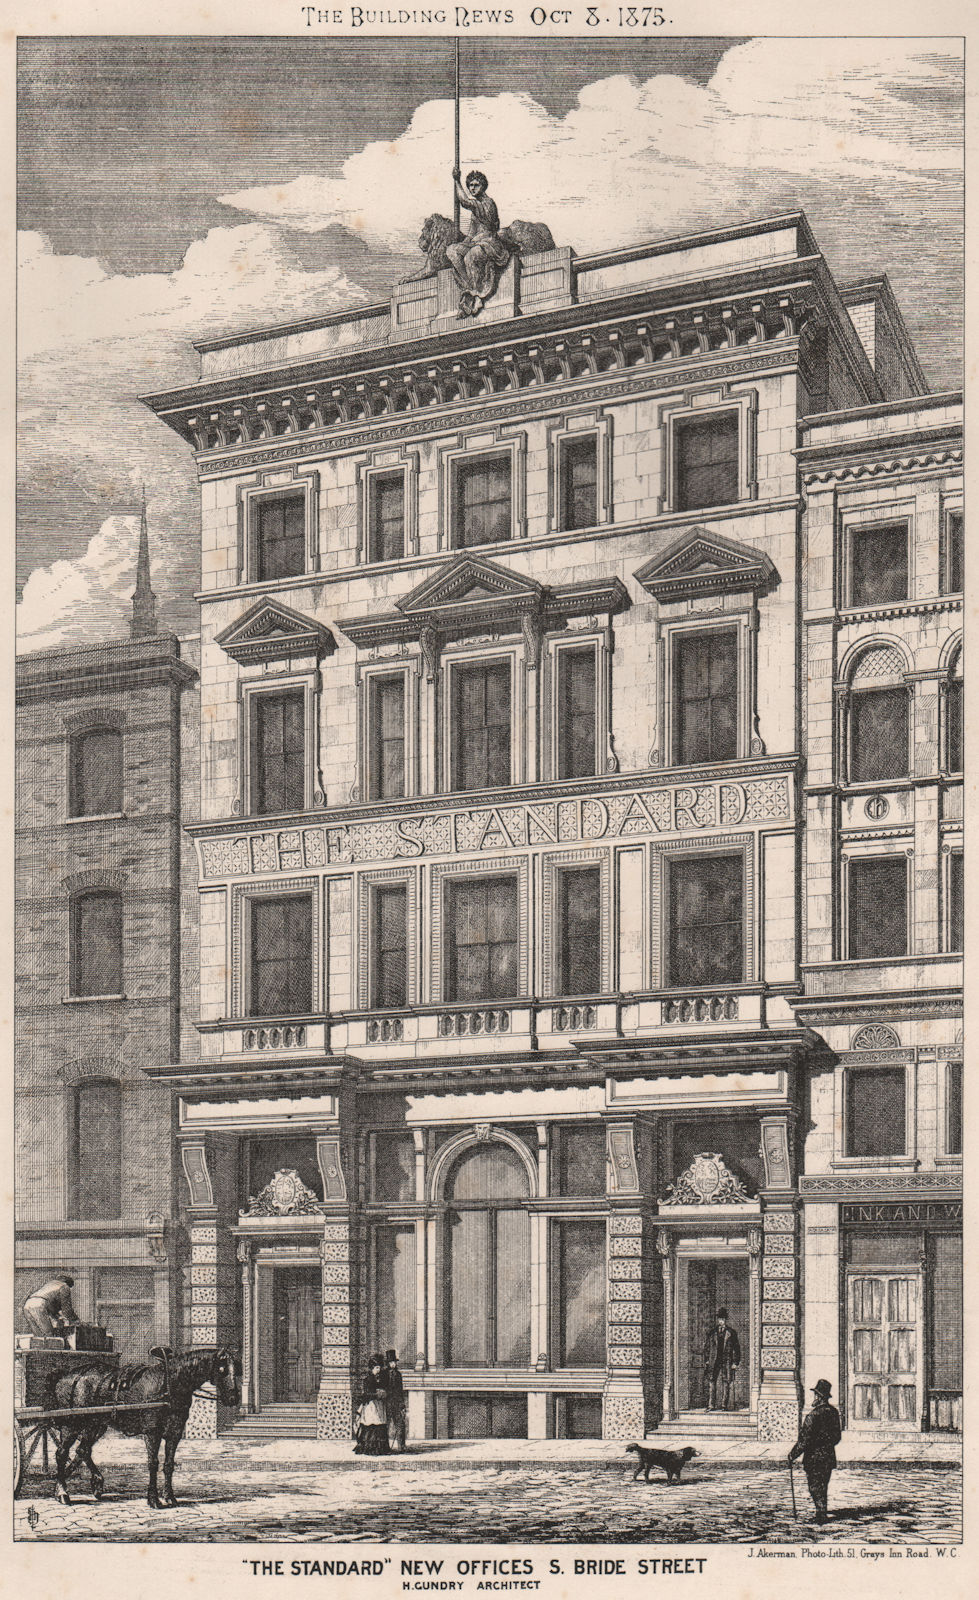 "The Standard" new offices, St. Bride Street; H. Gundry, Architect 1875 print